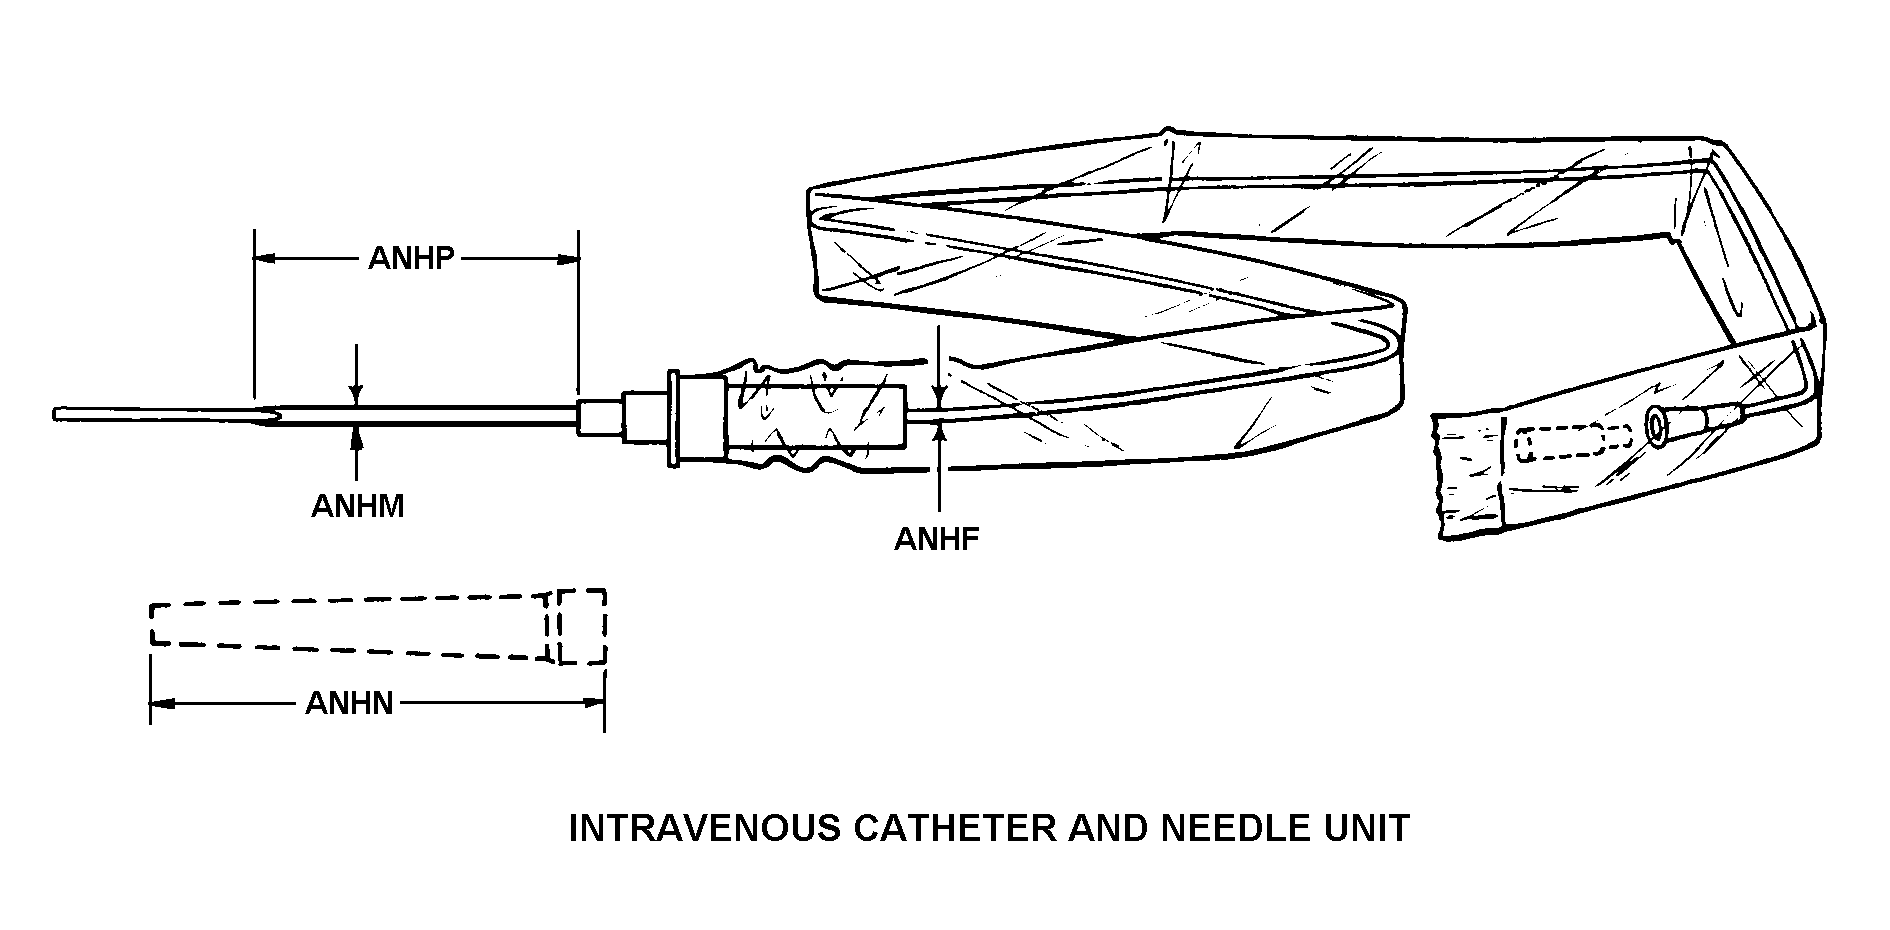 INTRAVENOUS CATHETER AND NEEDLE UNIT style nsn 6515-01-153-5905